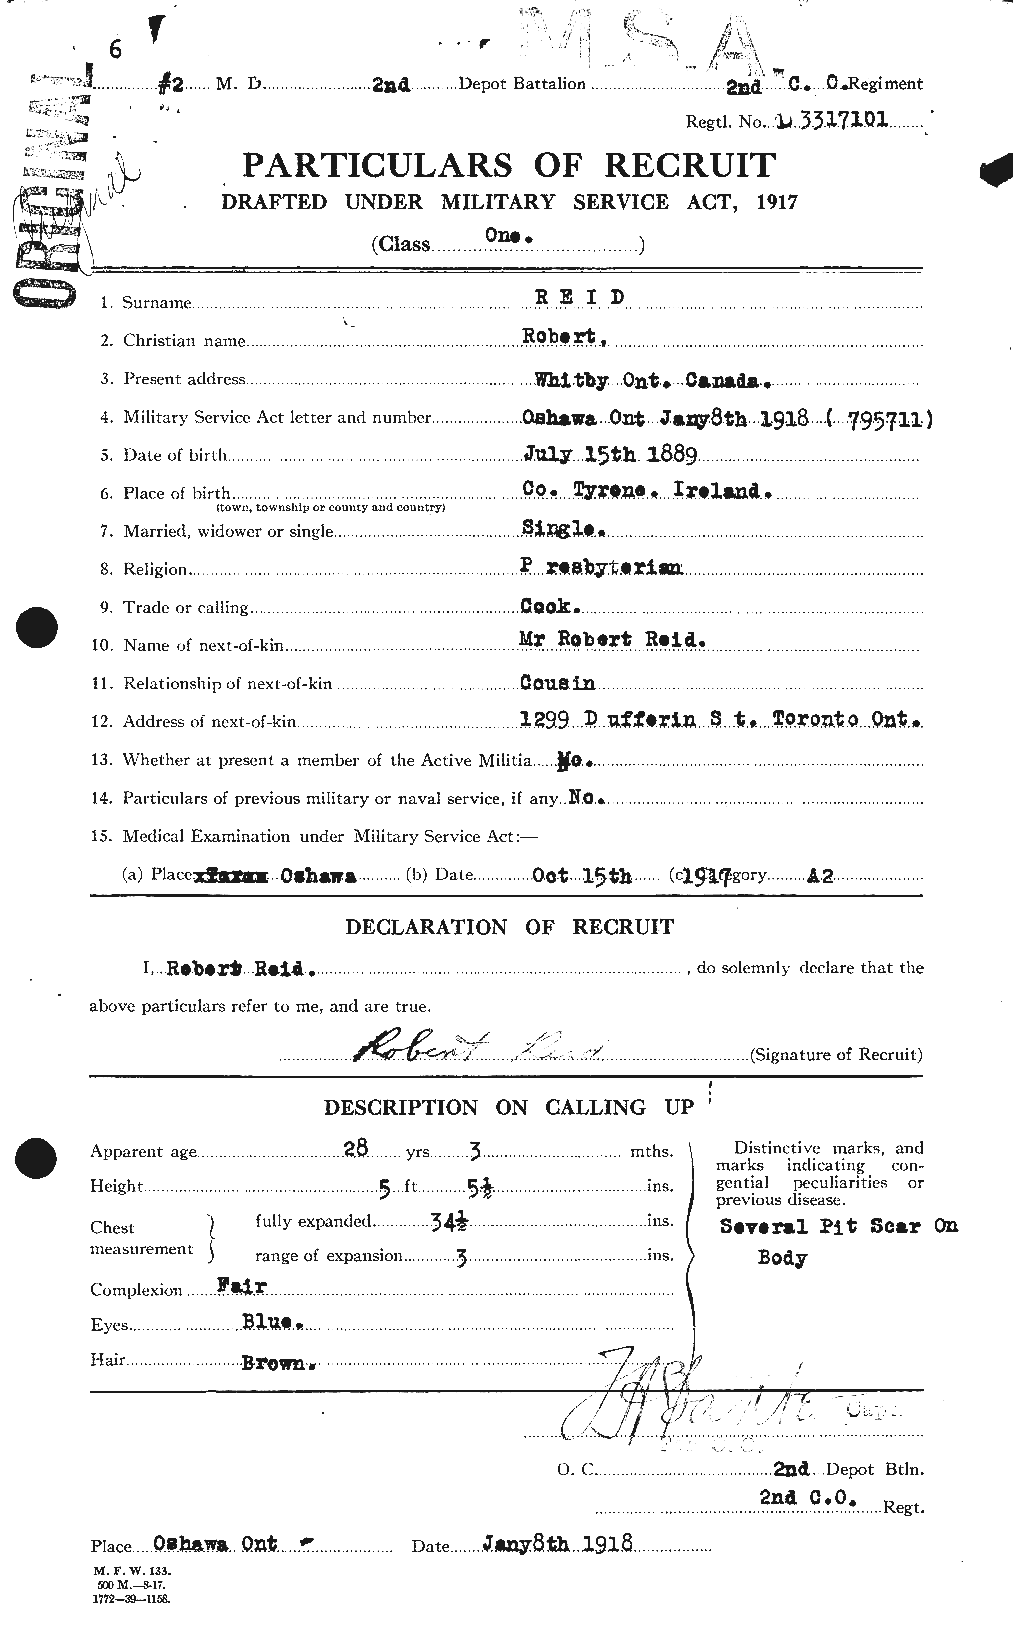 Personnel Records of the First World War - CEF 601868a